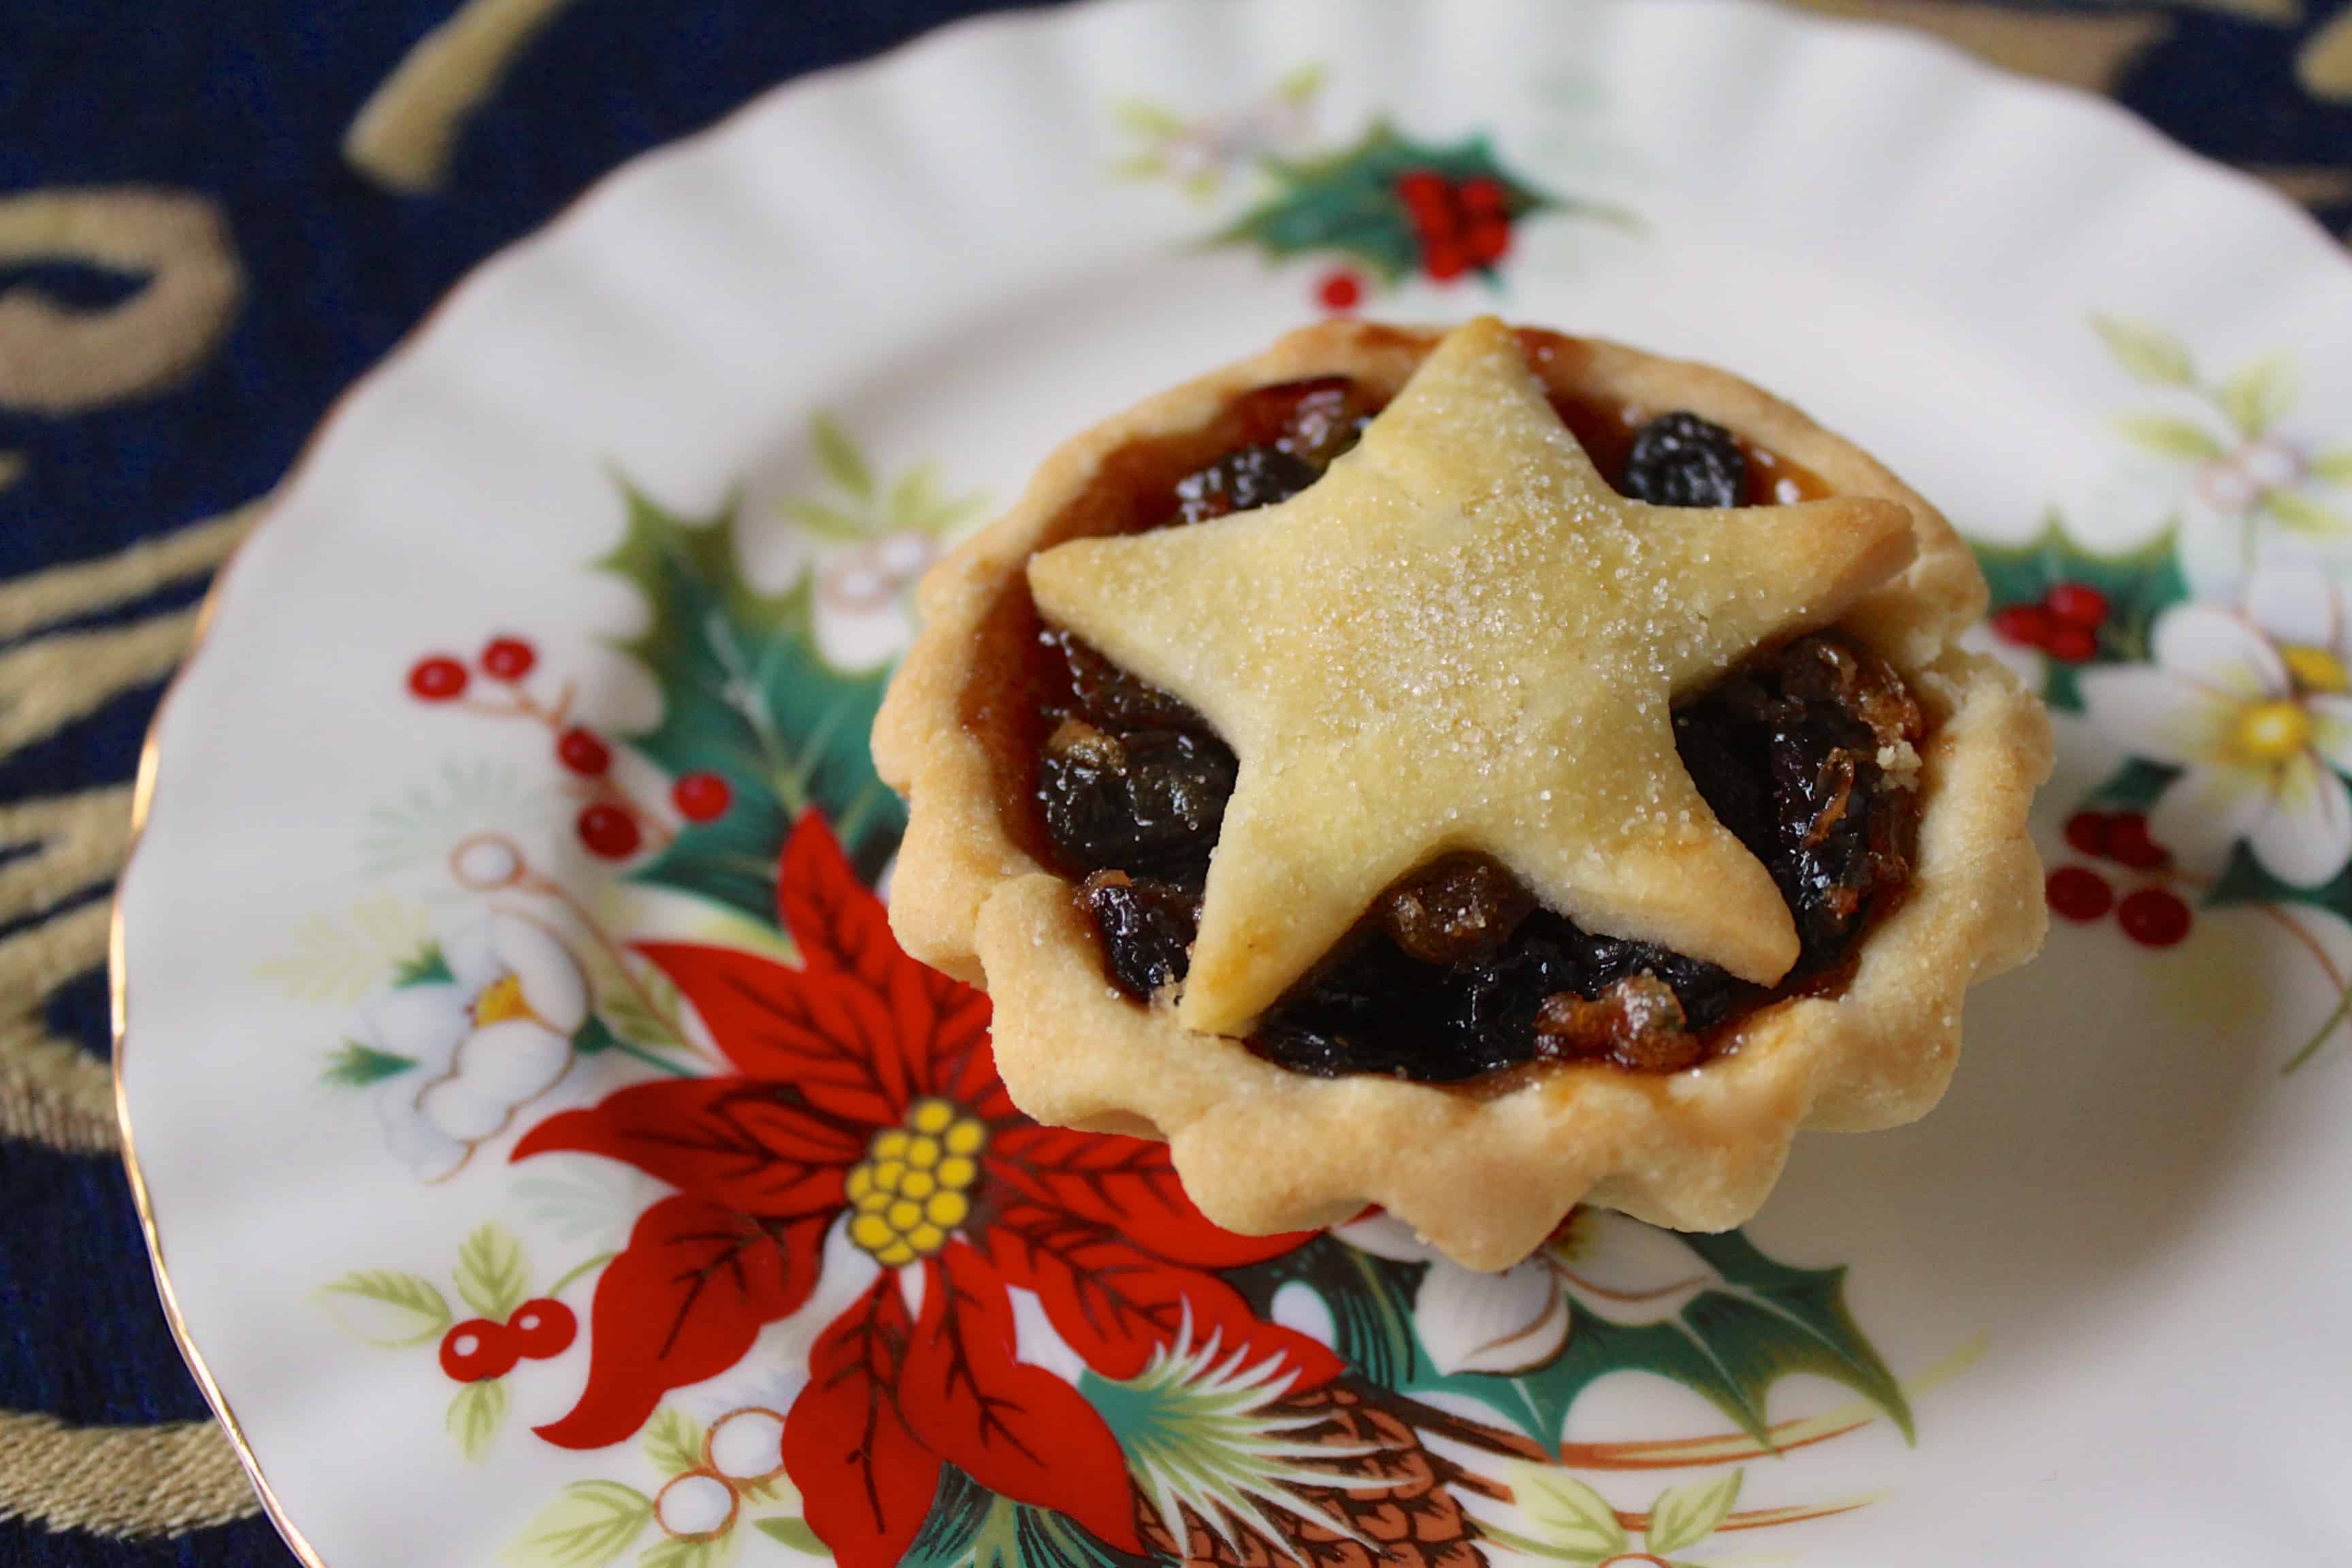 mince-pies-mincemeat-pies-for-a-traditional-british-christmas-treat